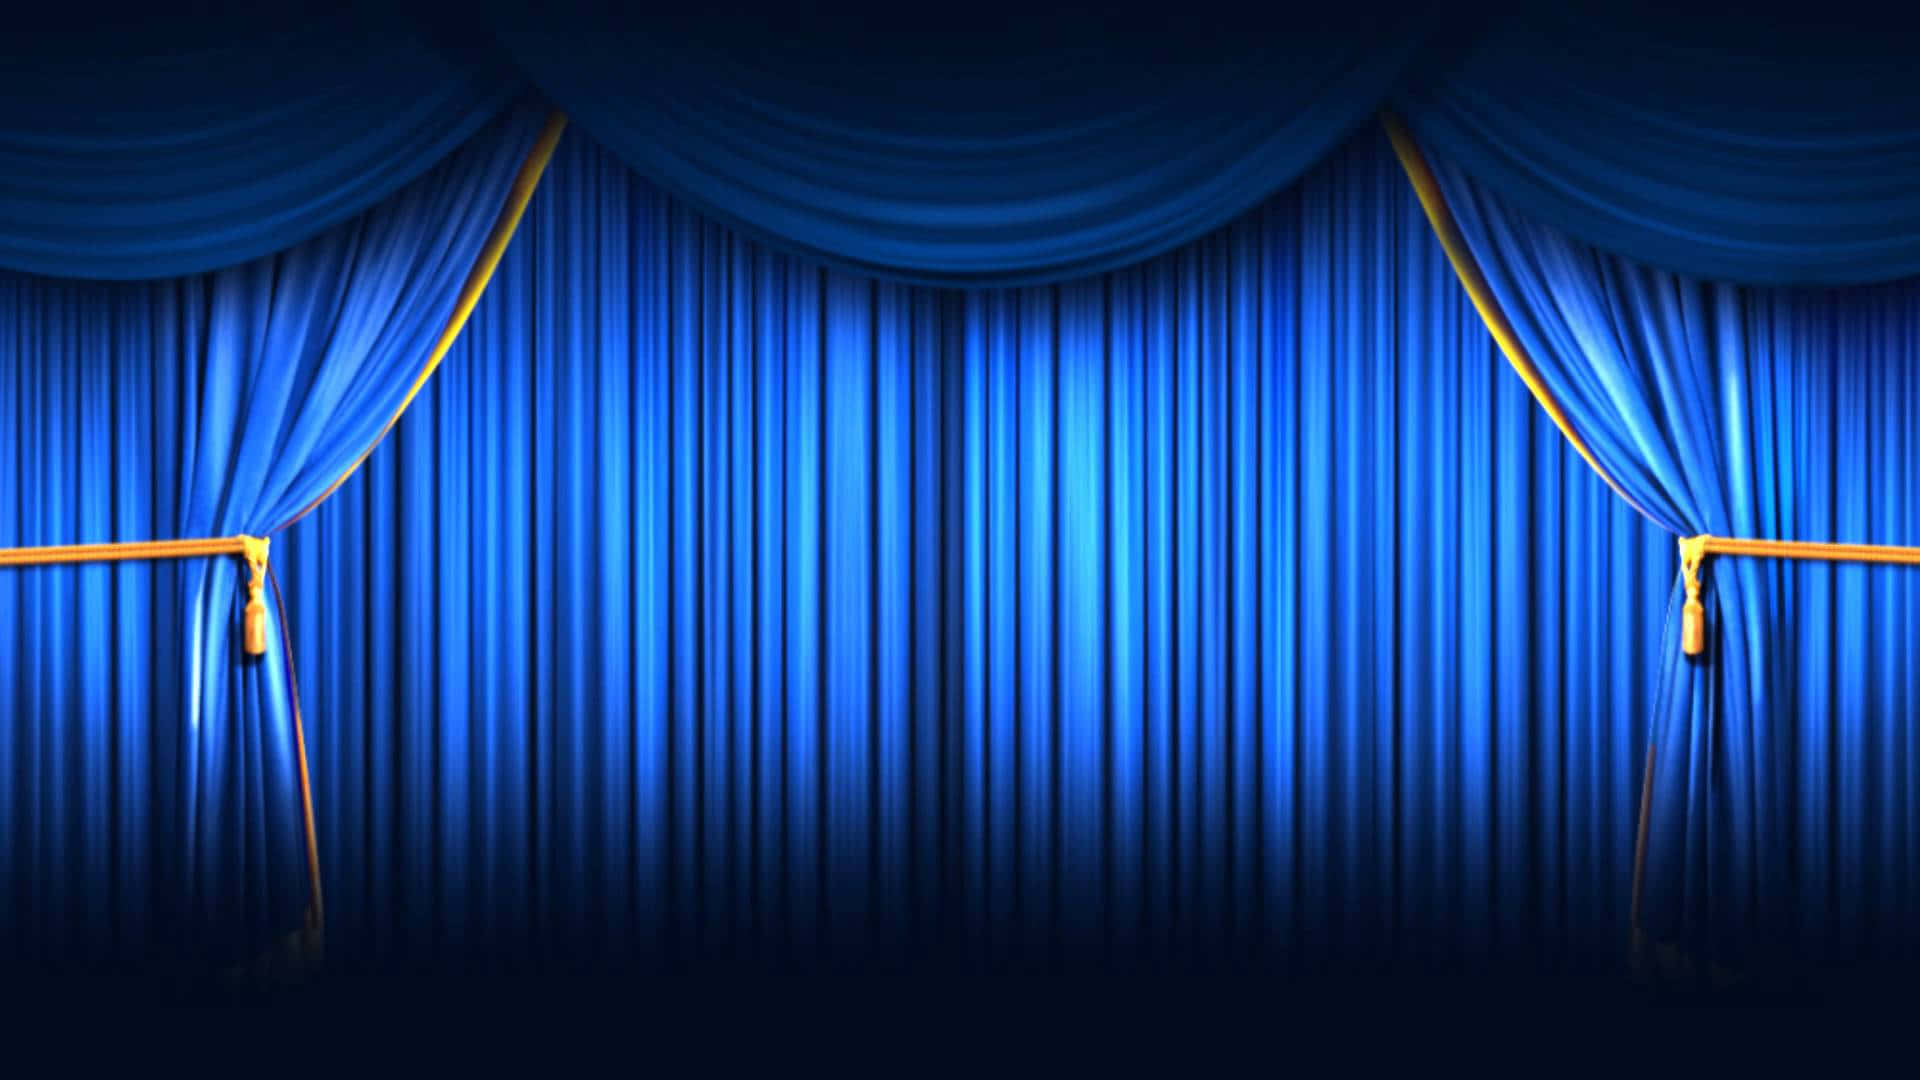 Blue And Gold Curtain Theatre Stage Picture